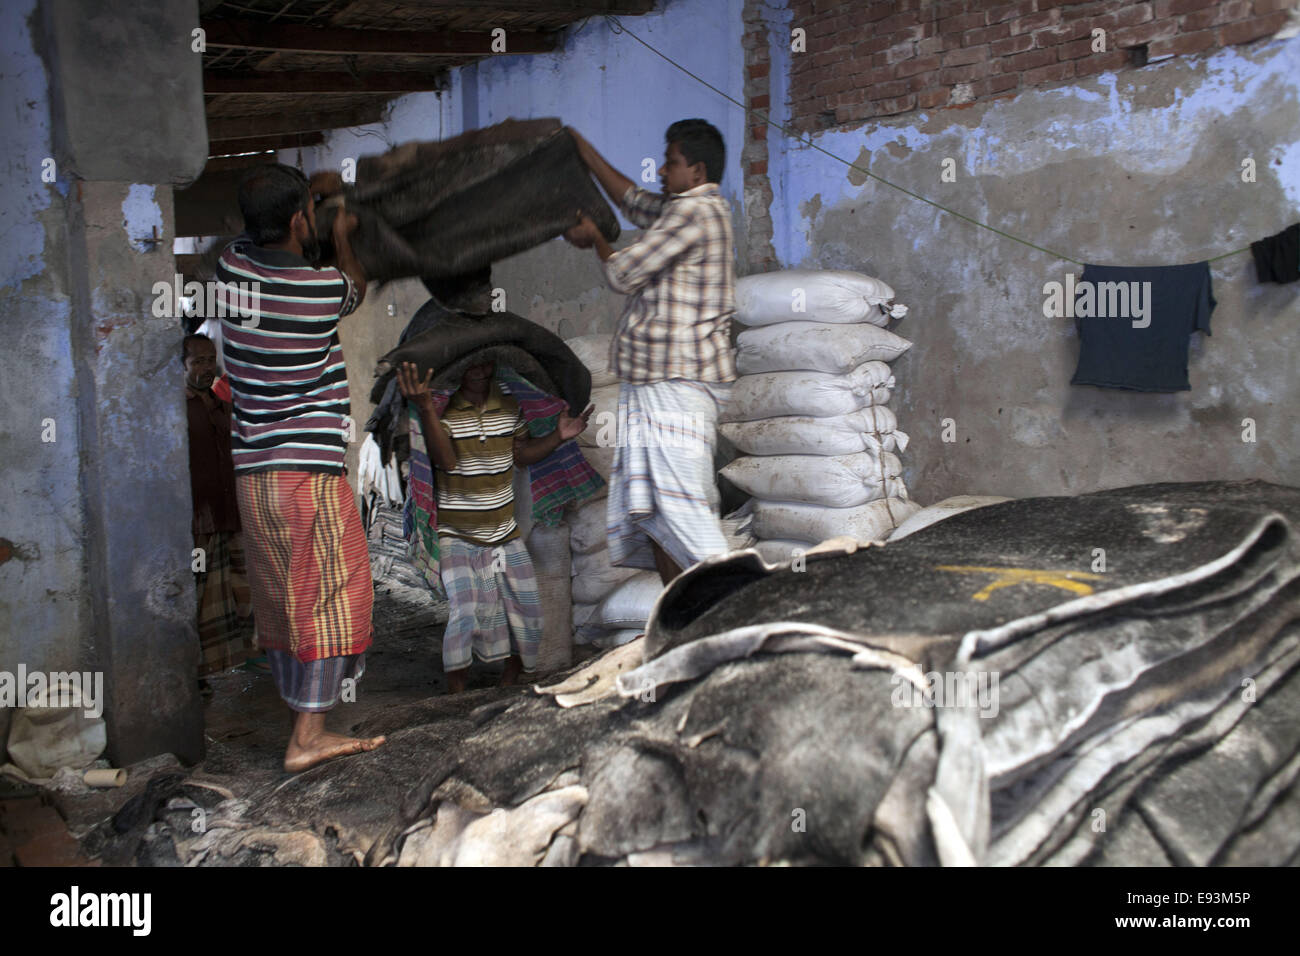 Dhaka, Bangladesh. 18th Oct, 2014. Workers carrying to process animal skins slaughtered during the Eid Al Adha, at a Leather factory in Hazaribagh, Dhaka.The Bangladeshi leather industry has earned 980.67 million US dollar from the exports of leather and leather goods in fiscal 20/12/2013, according to Bangladesh's Export Promotion Bureau © Zakir Hossain Chowdhury/ZUMA Wire/Alamy Live News Stock Photo